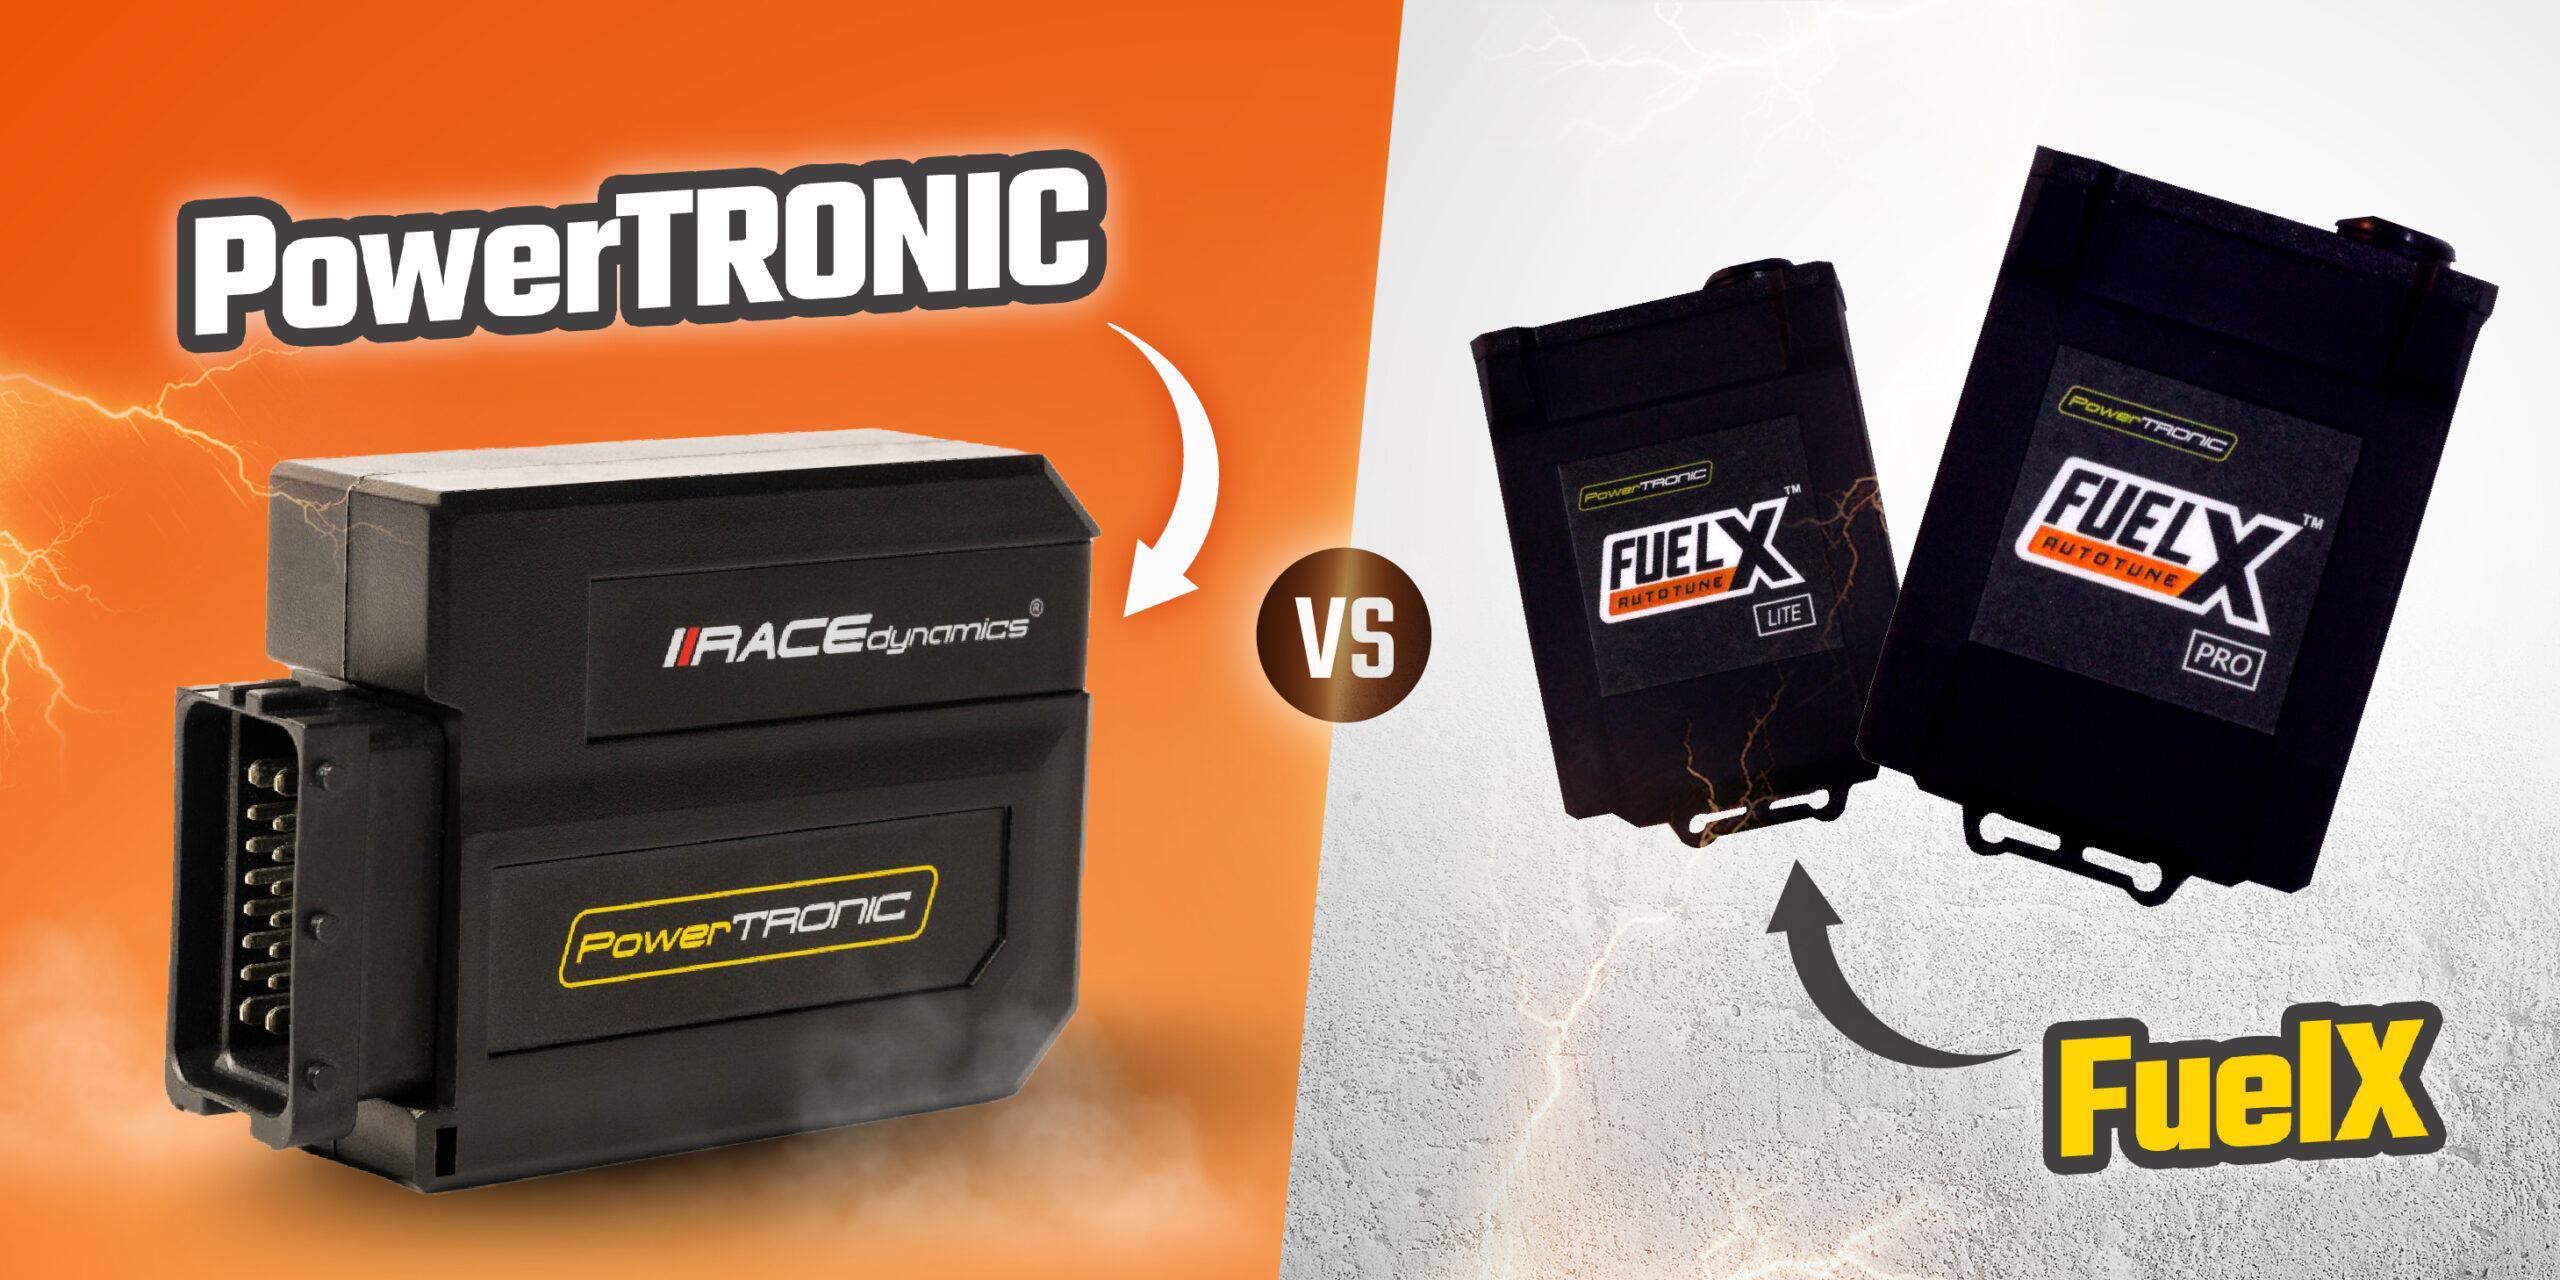 PowerTronic and FuelX